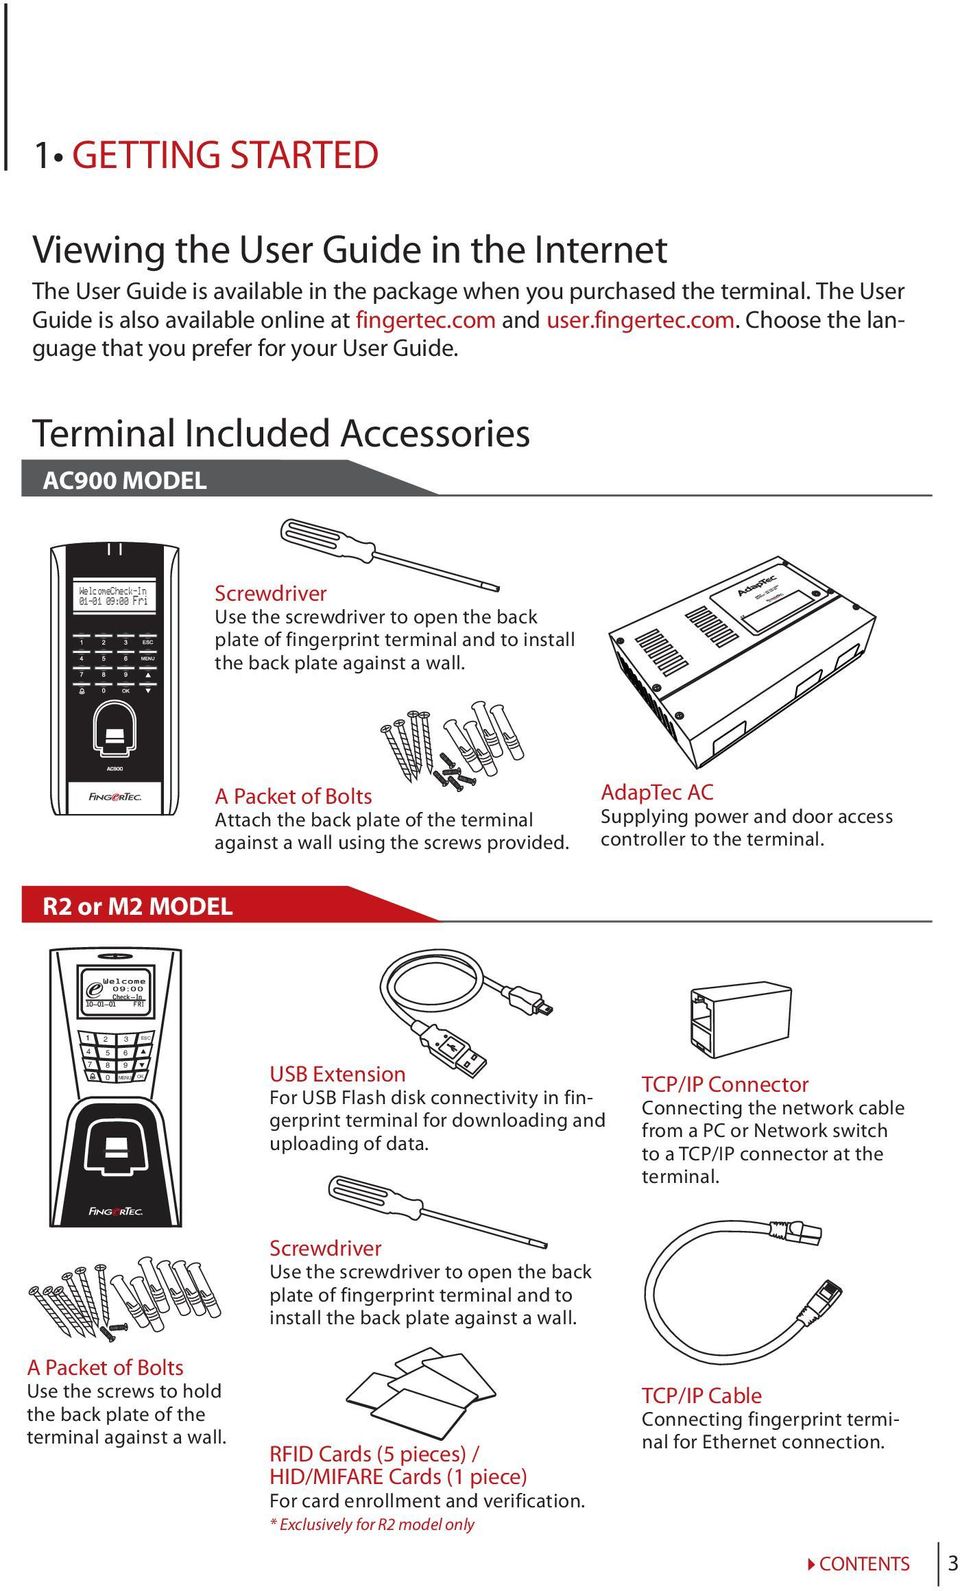 Terminal Included Accessories AC900 MODEL WelcomeCheck-In 01-01 09:00 Fri Screwdriver Use the screwdriver to open the back plate of fingerprint terminal and to install the back plate against a wall.